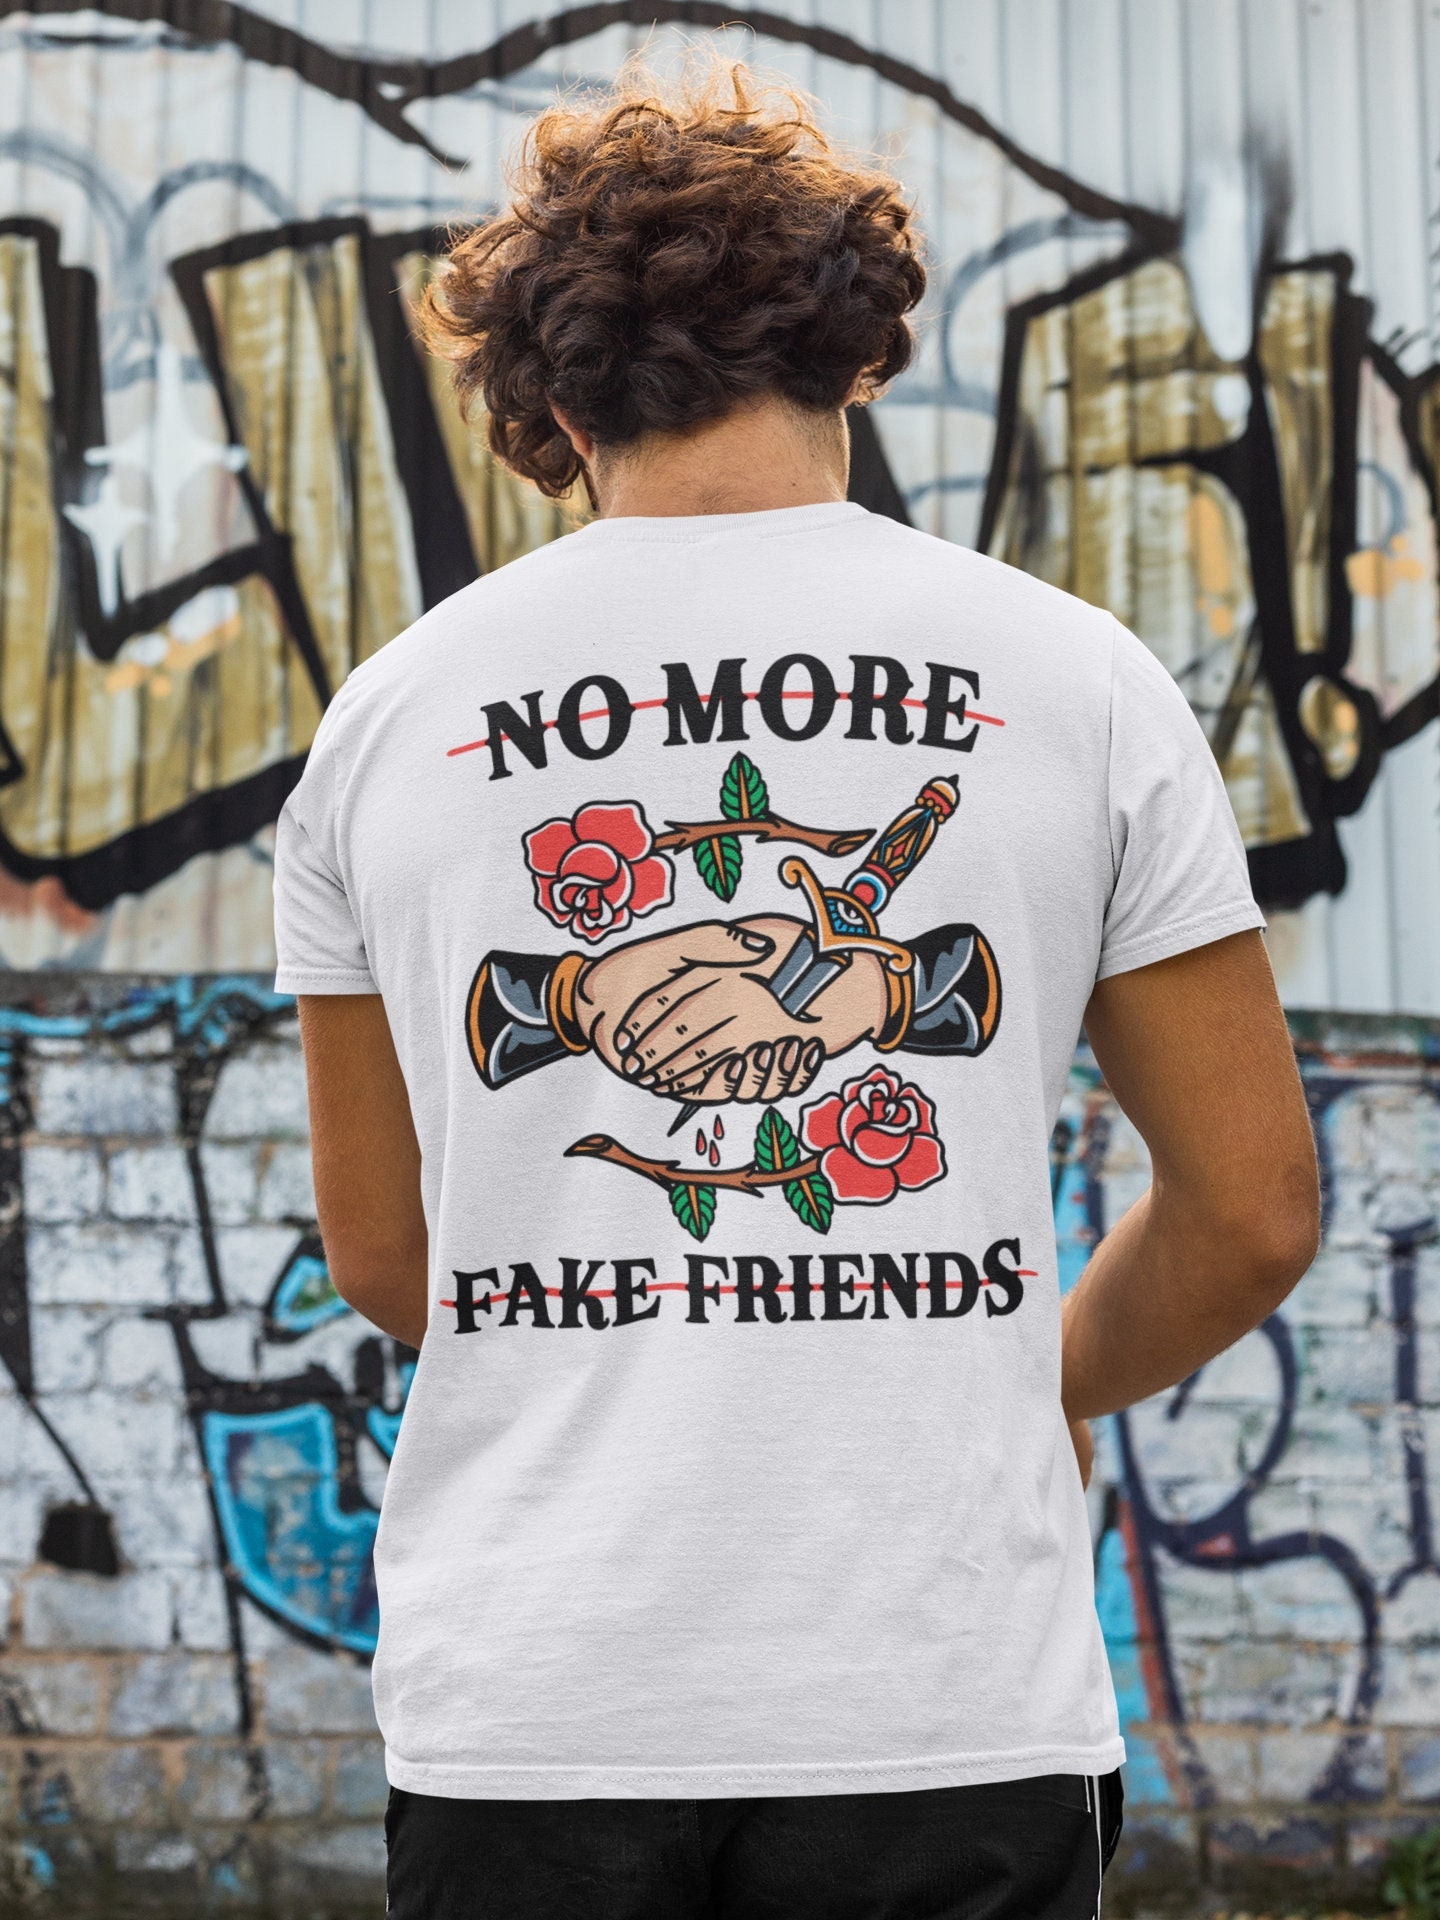 Discover 181+ tattoo inspired apparel latest